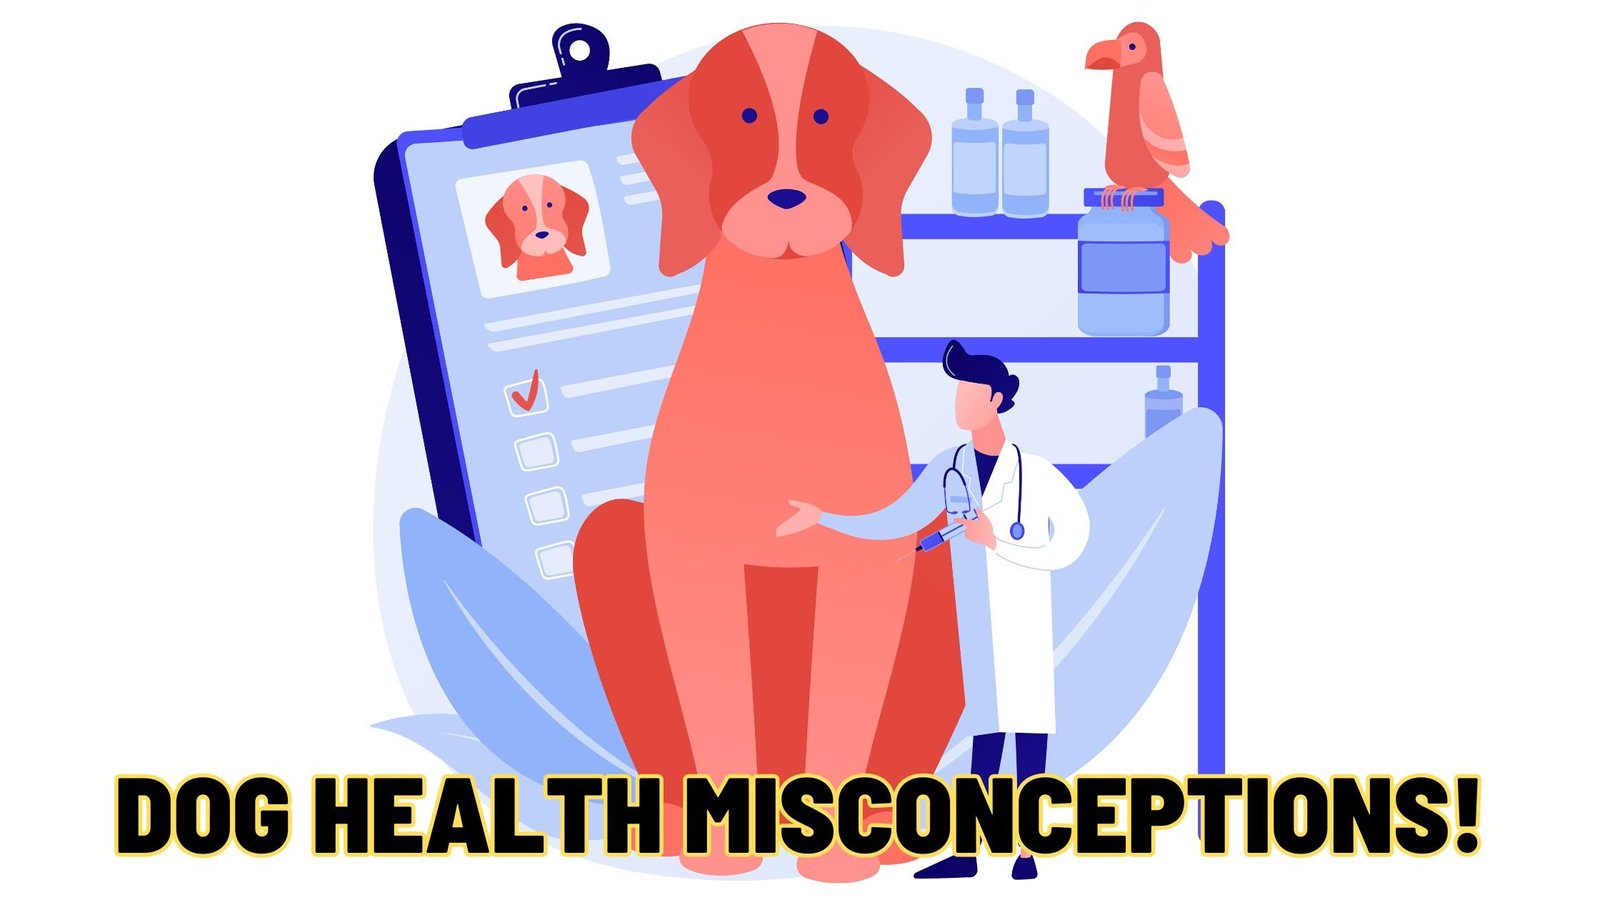 COMMON MISCONCEPTIONS ABOUT DOG HEALTH